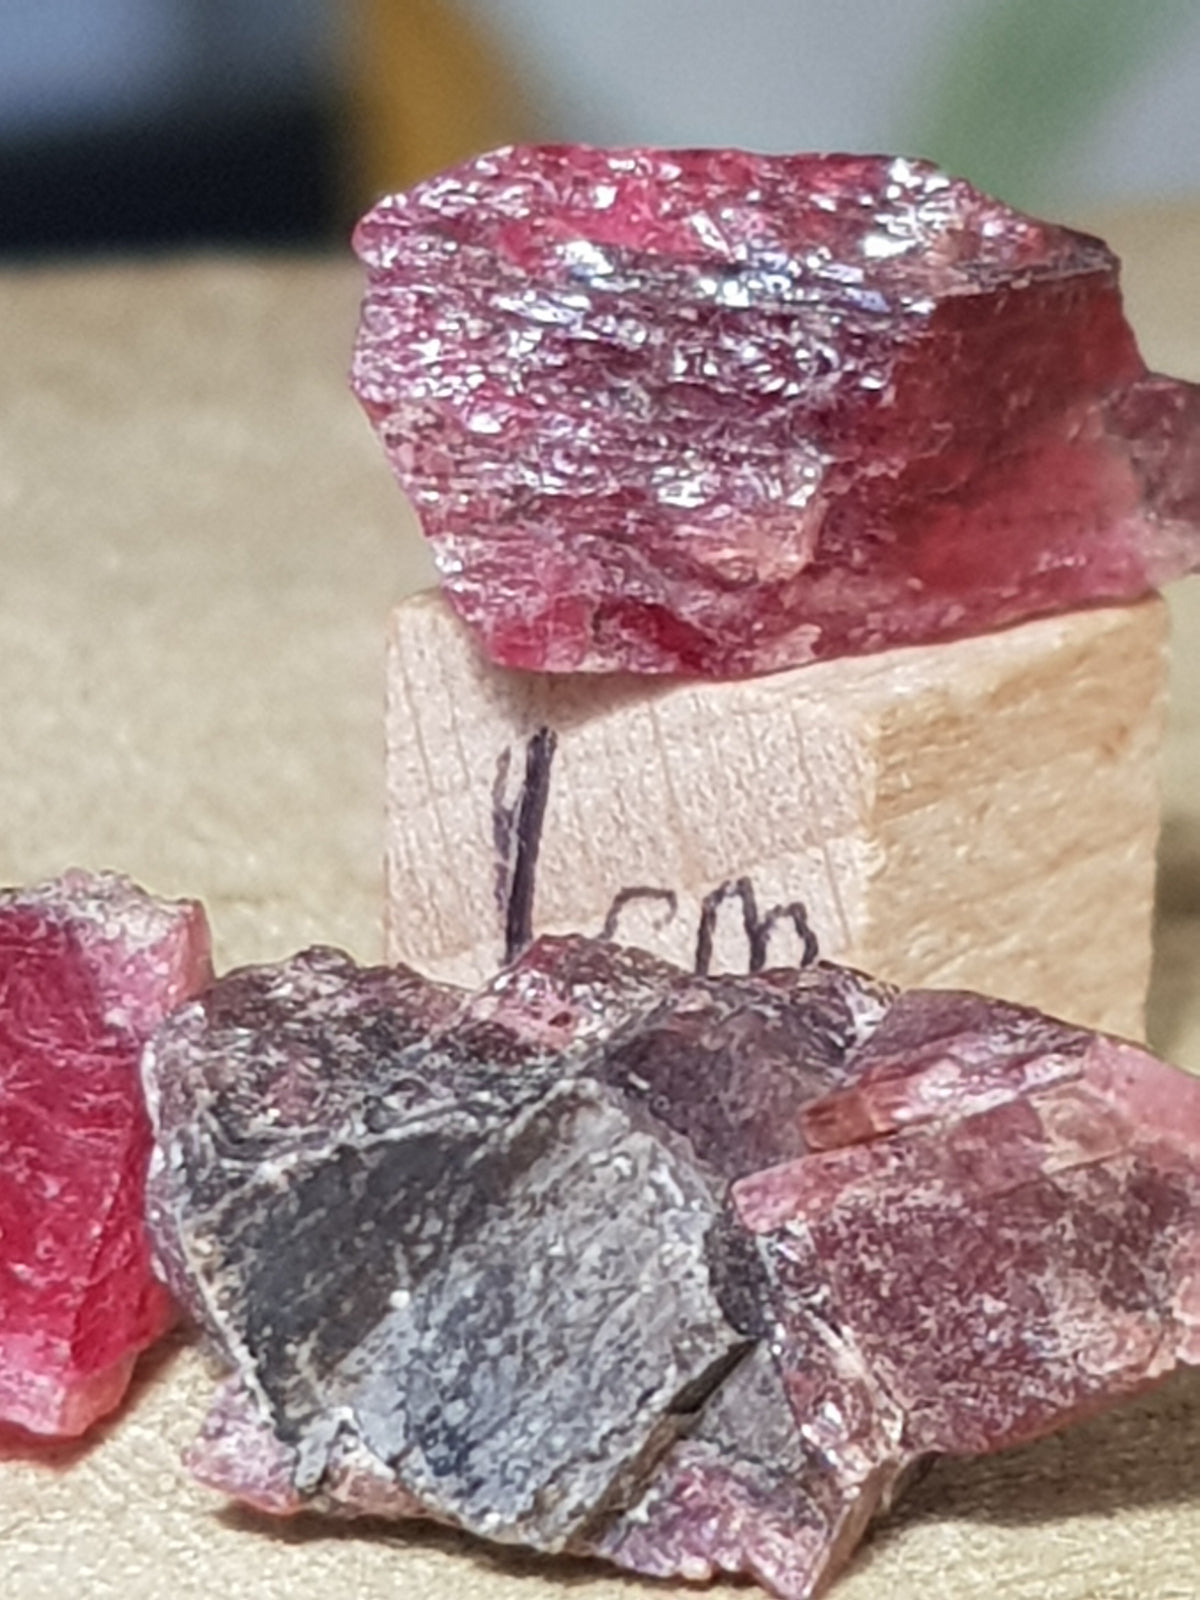 pyroxmangite chips. They are a vivid pink and very gemmy. They are about 1.25cm on the longest plane.